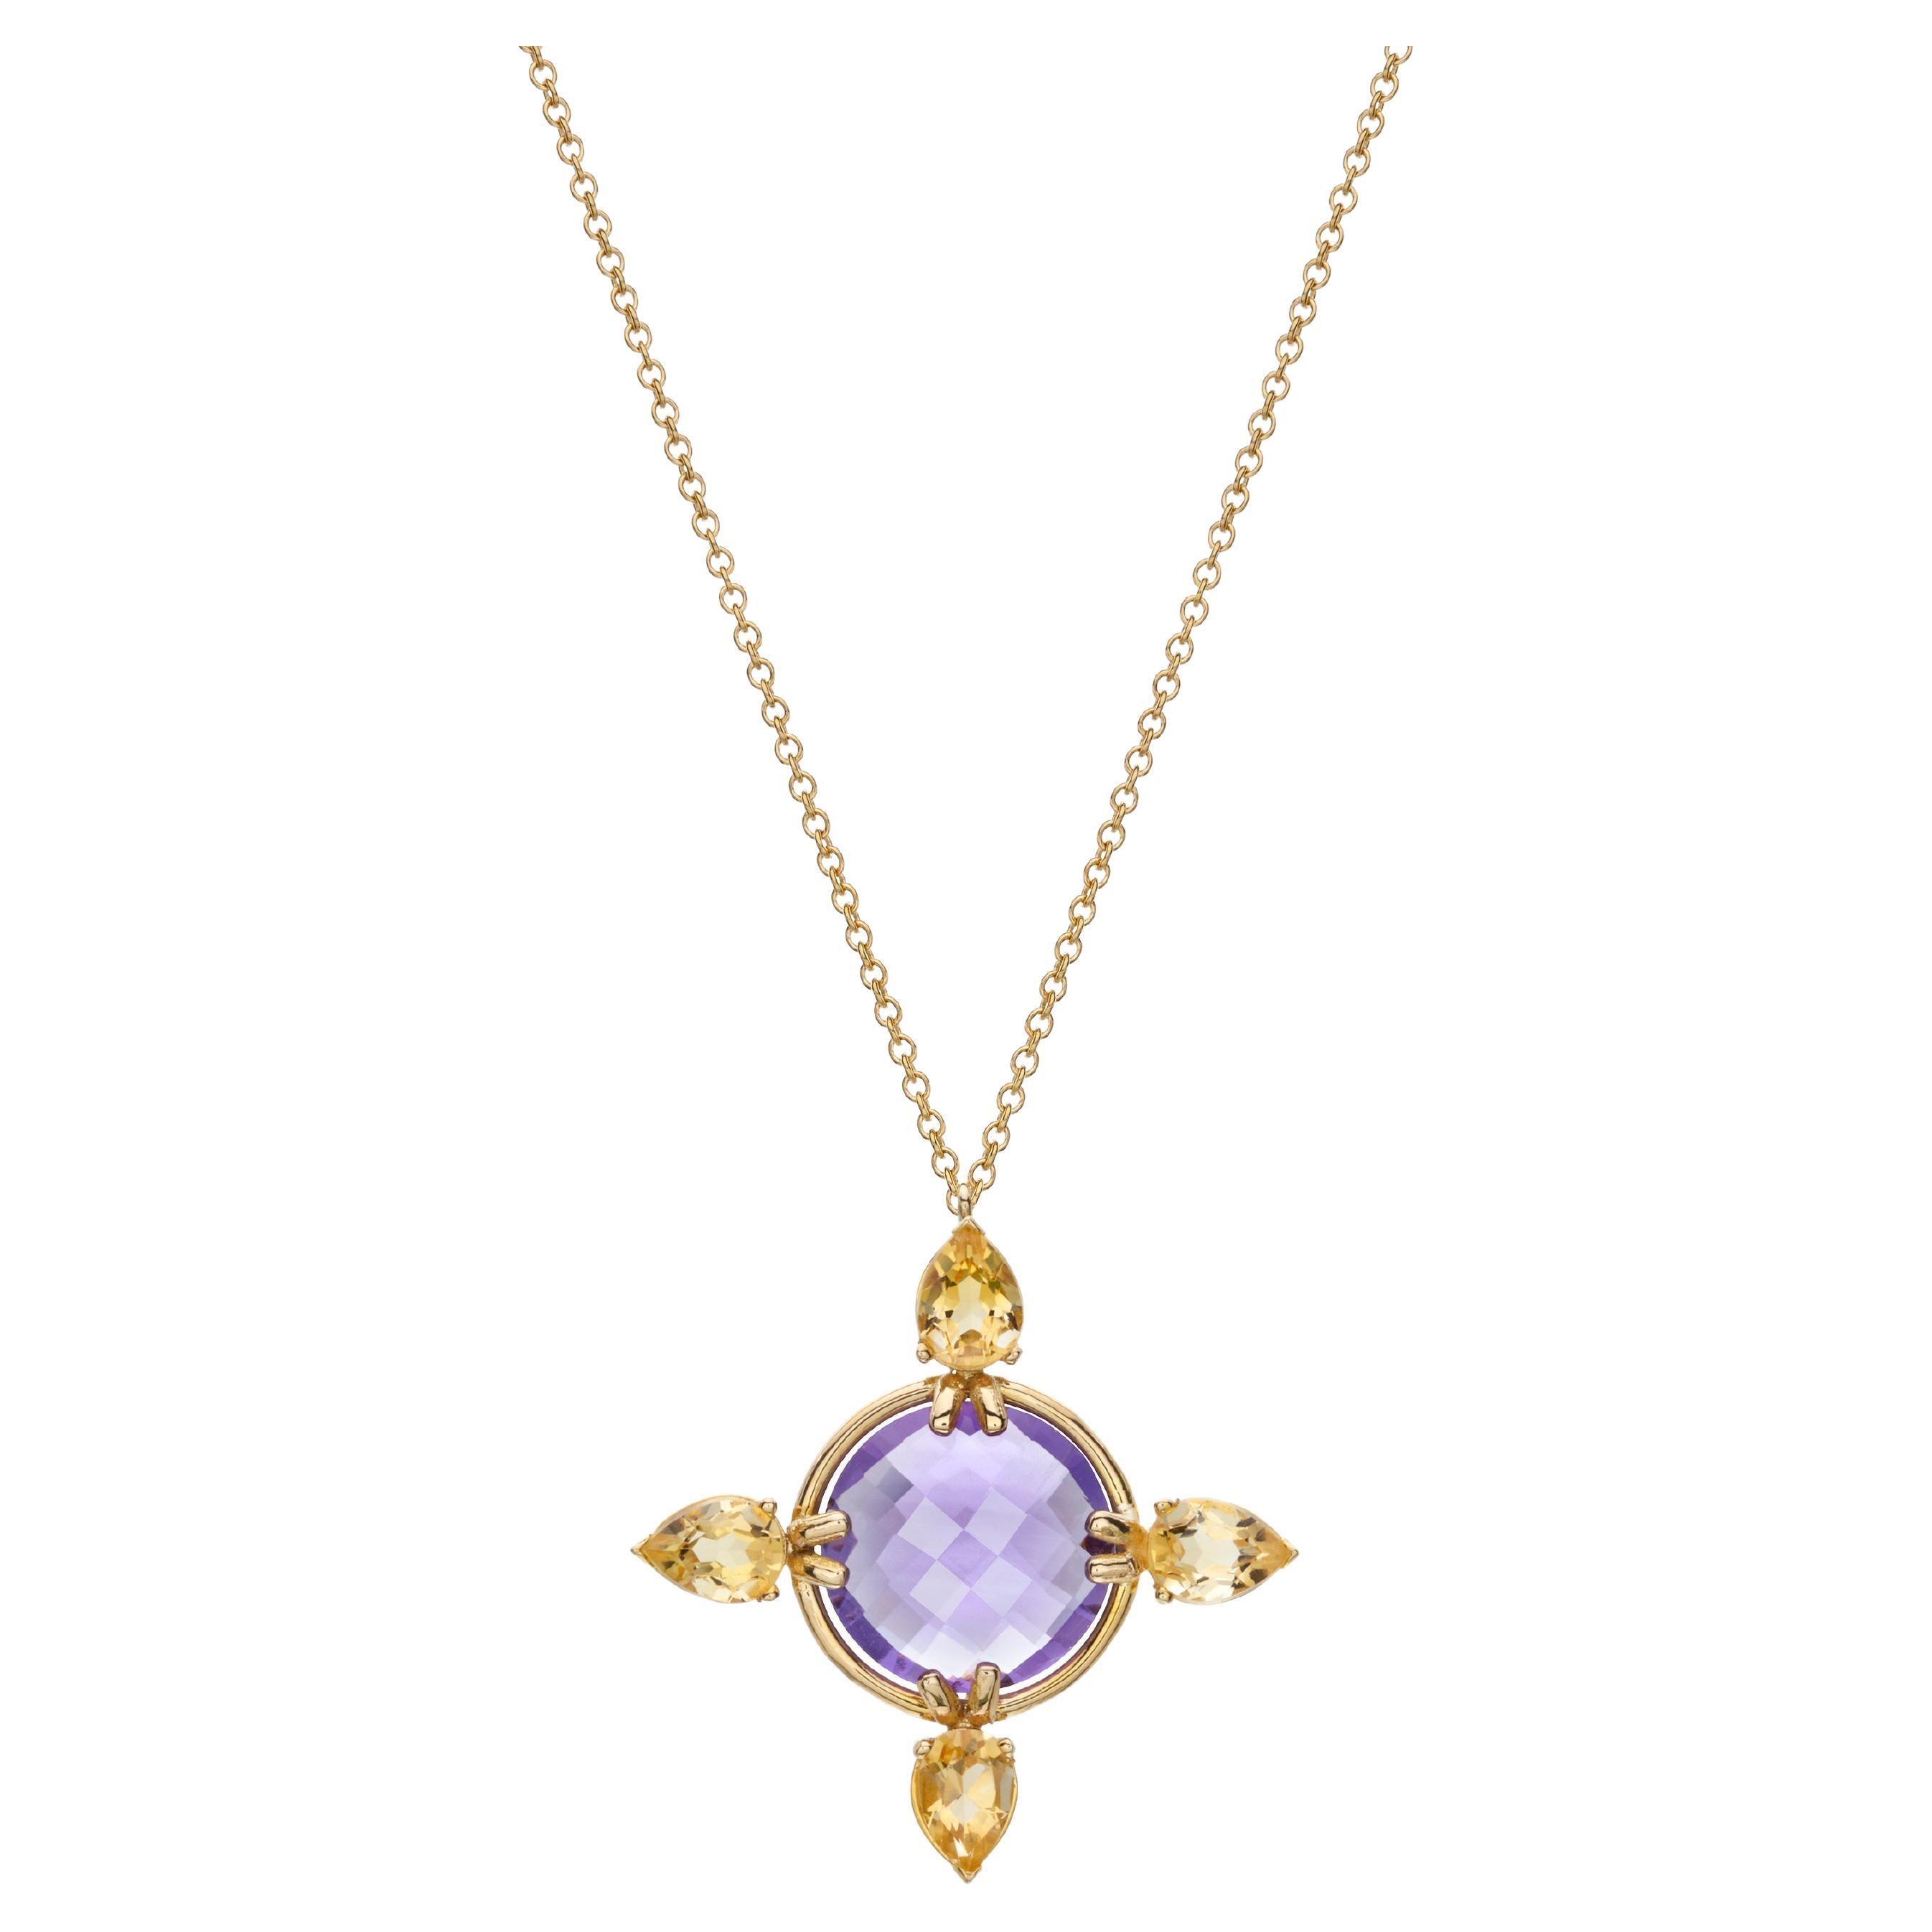 18Kt Gold Pendant Necklace with a Rose Cut Amethyst and Pear Citrine Cross Shape